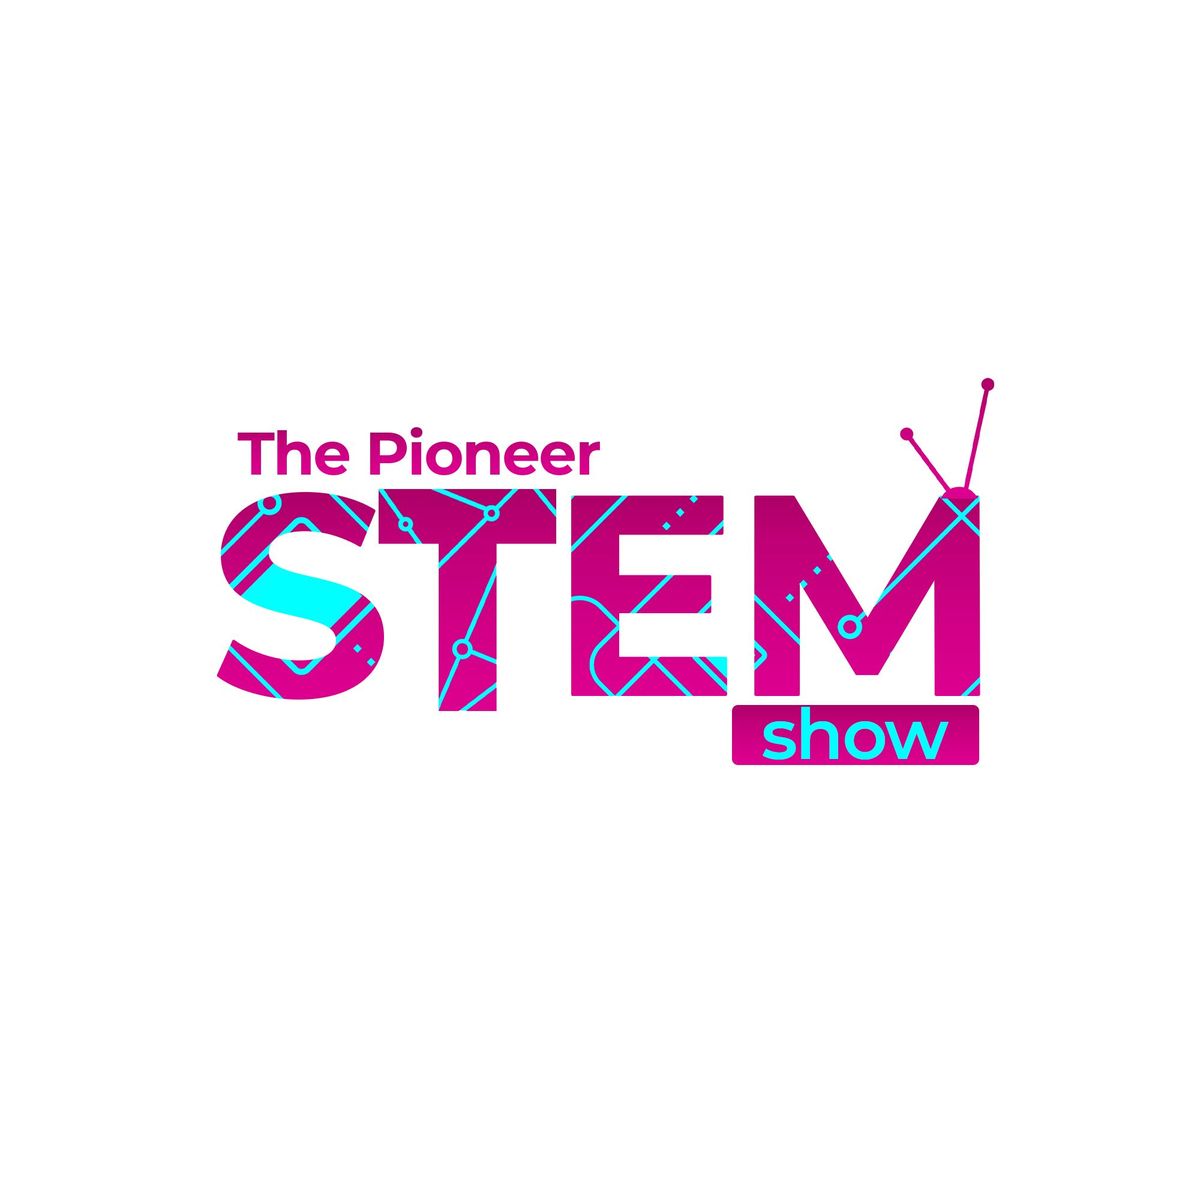 The Pioneer Stem Show